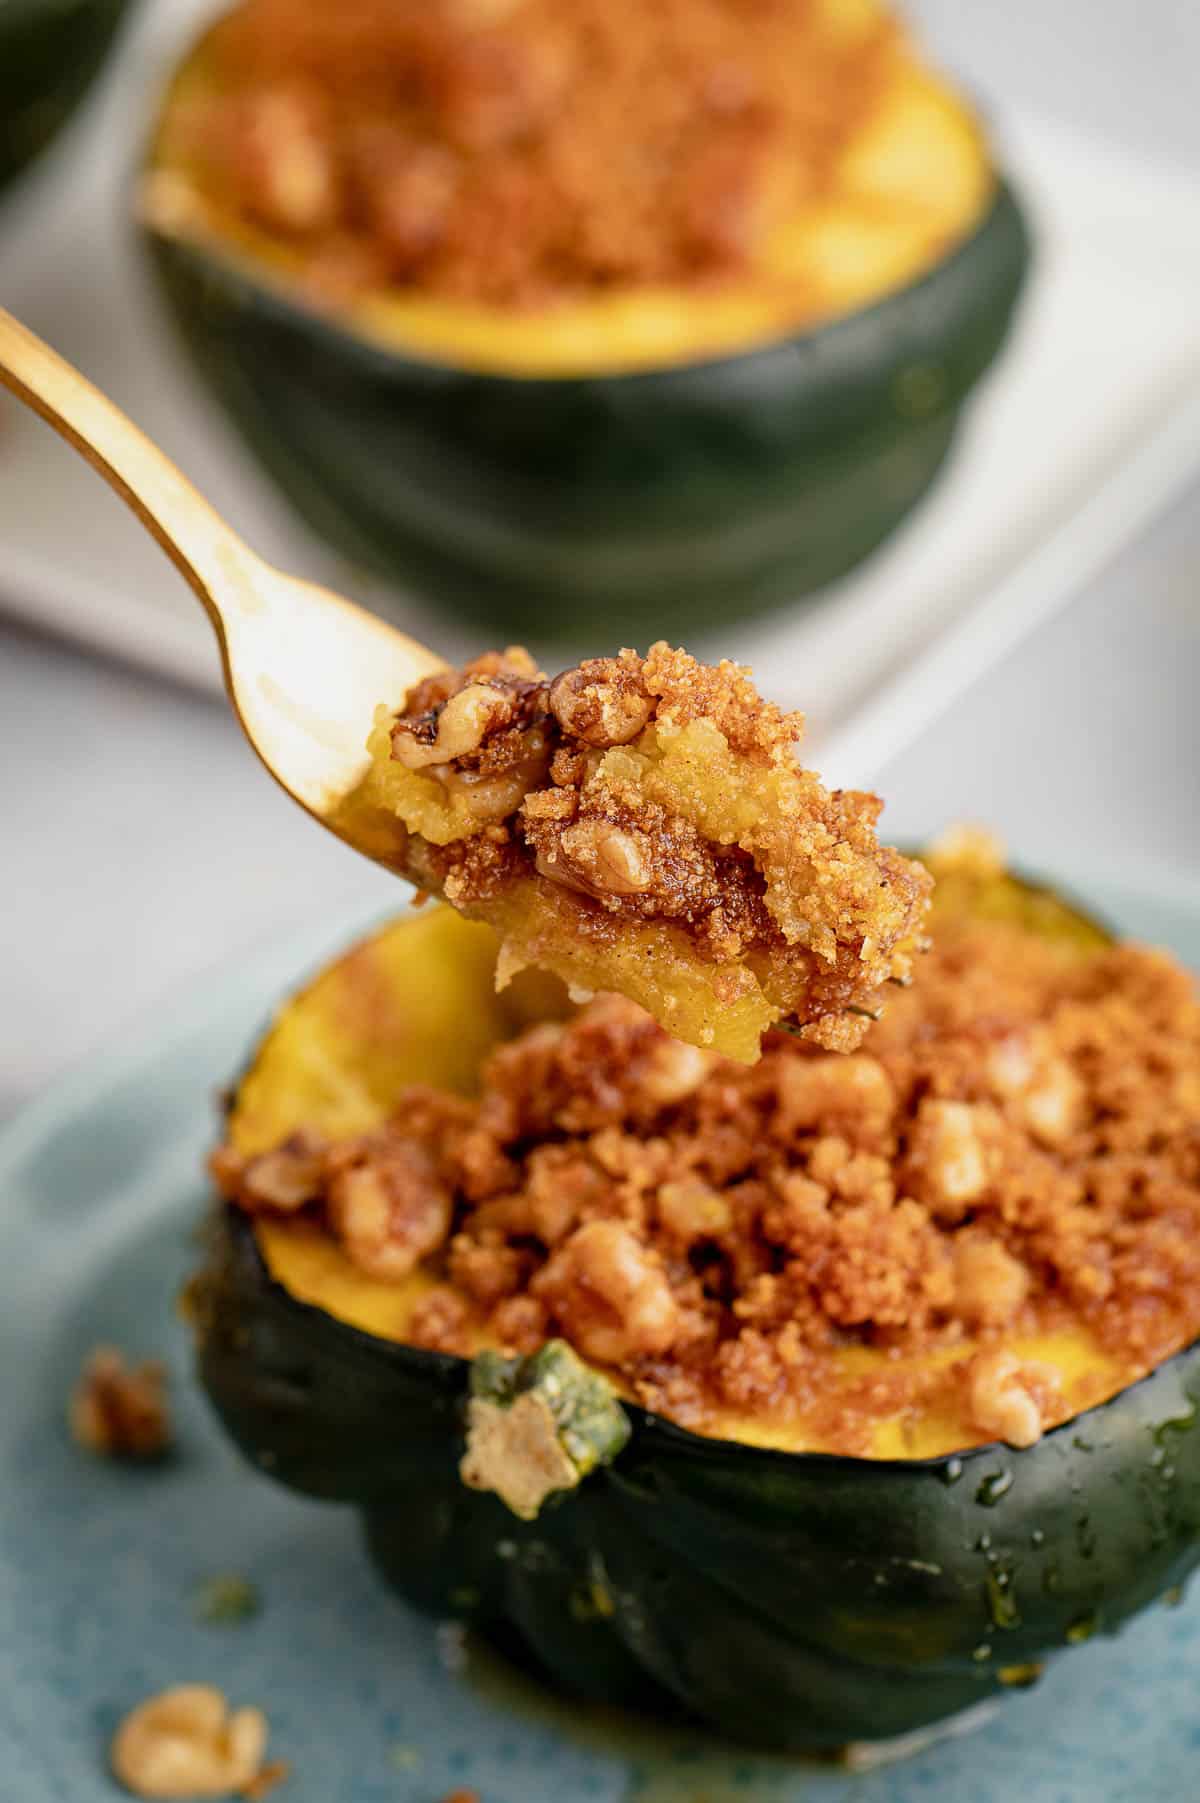 A forkful of baked acorn squash is lifted from one half of a stuffed acorn squash on a plate.